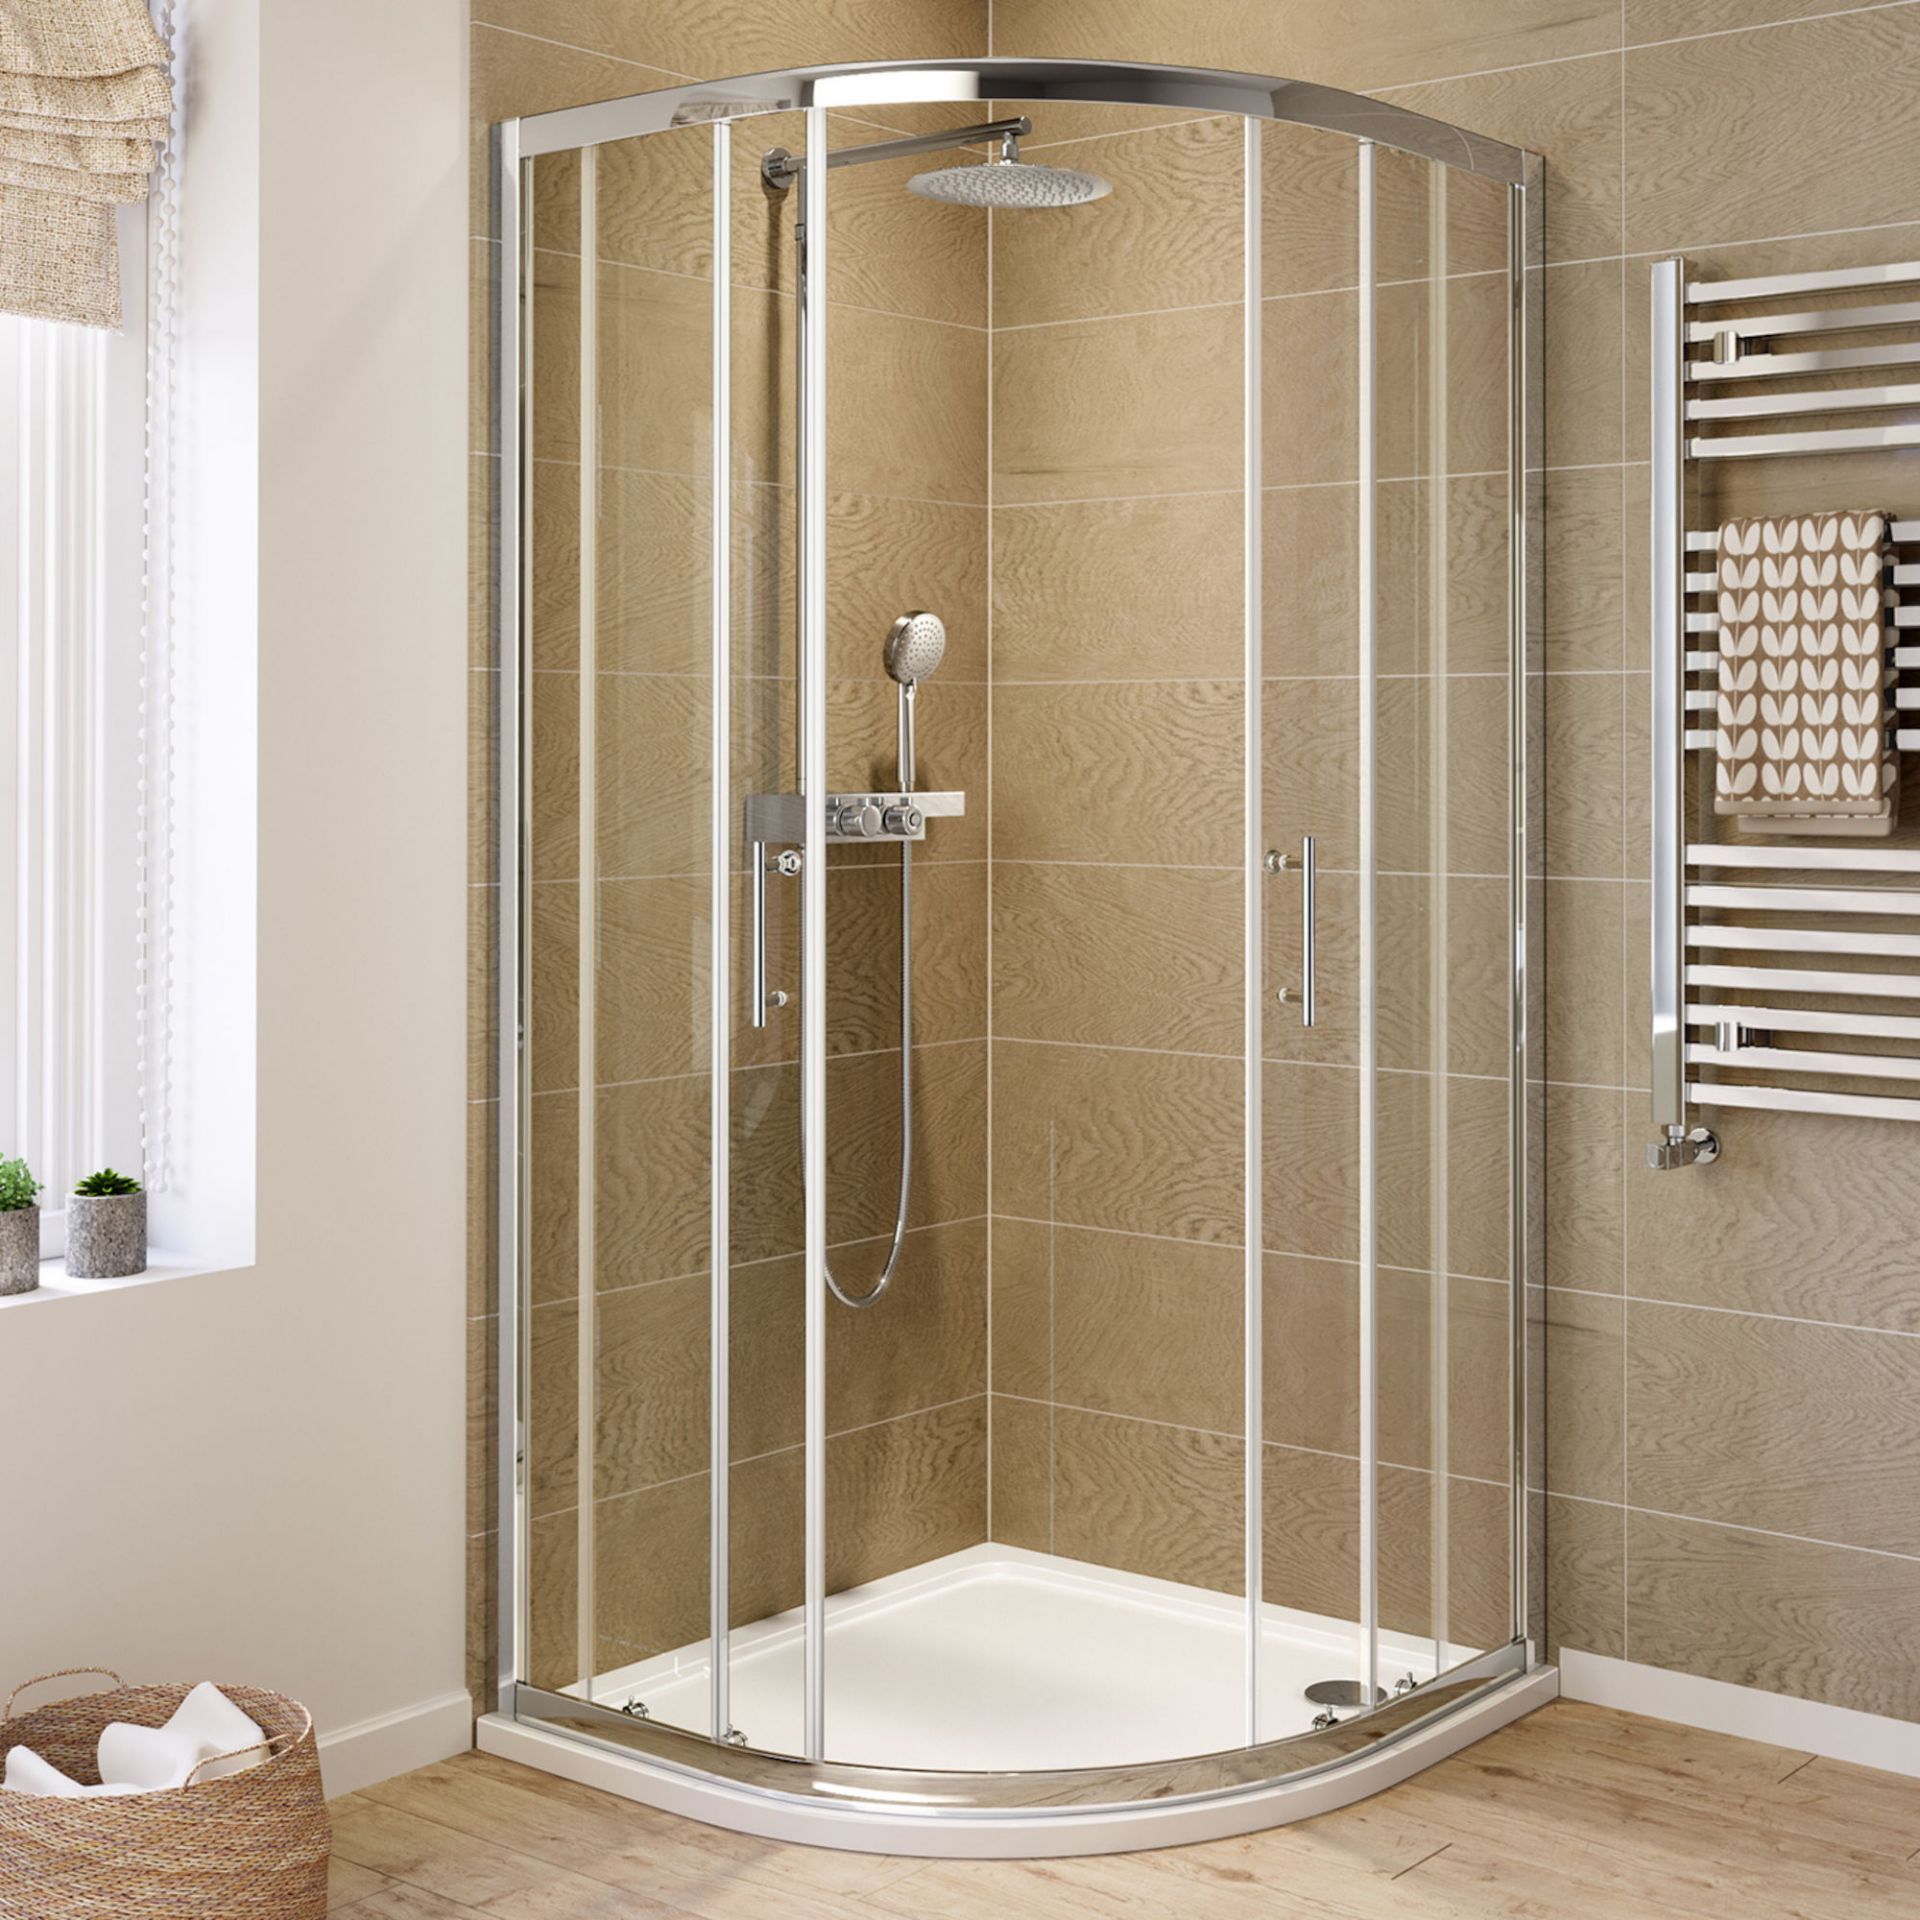 (YC60) NEW 900x900mm - 6mm - Elements Quadrant Shower Enclosure. RRP £293.99. 6mm Safety Glass...